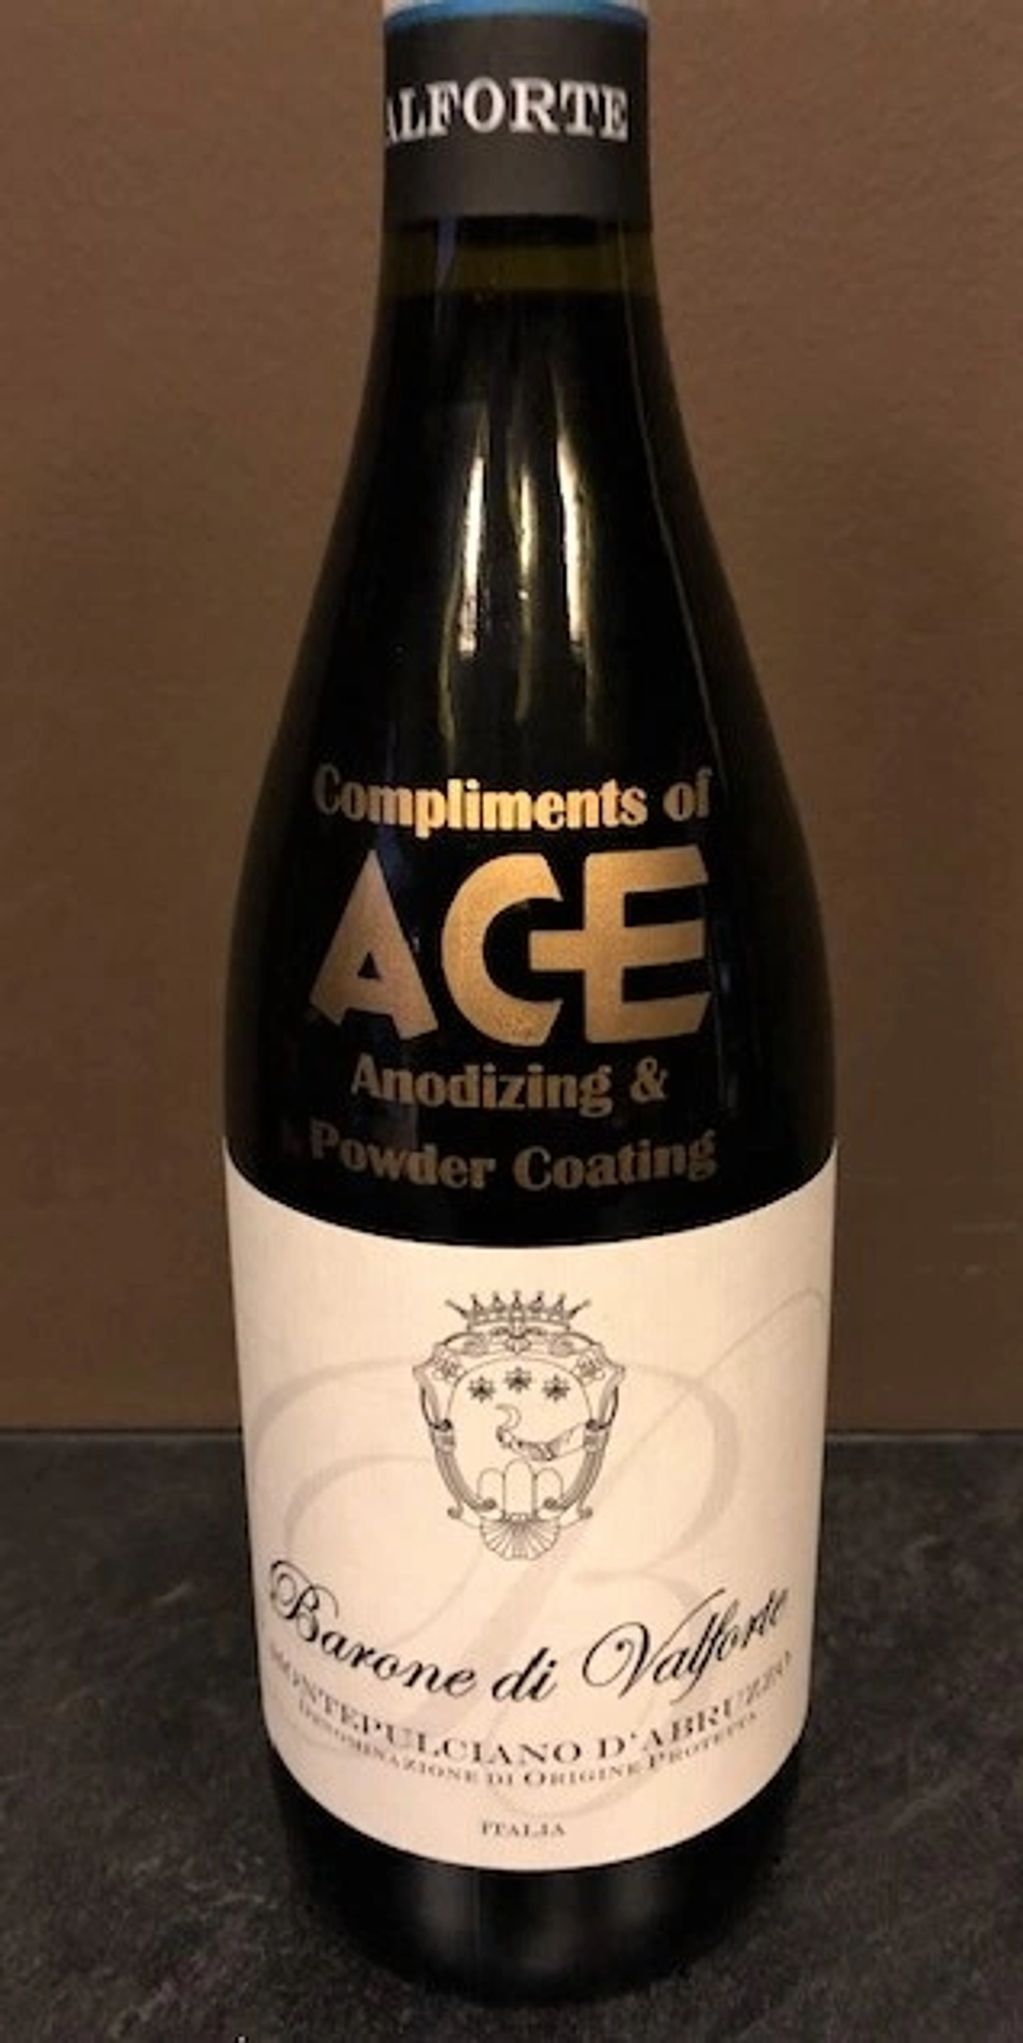 Unique Wine Bottle Printing is perfect for Corporate or Business Client Gifts..!!